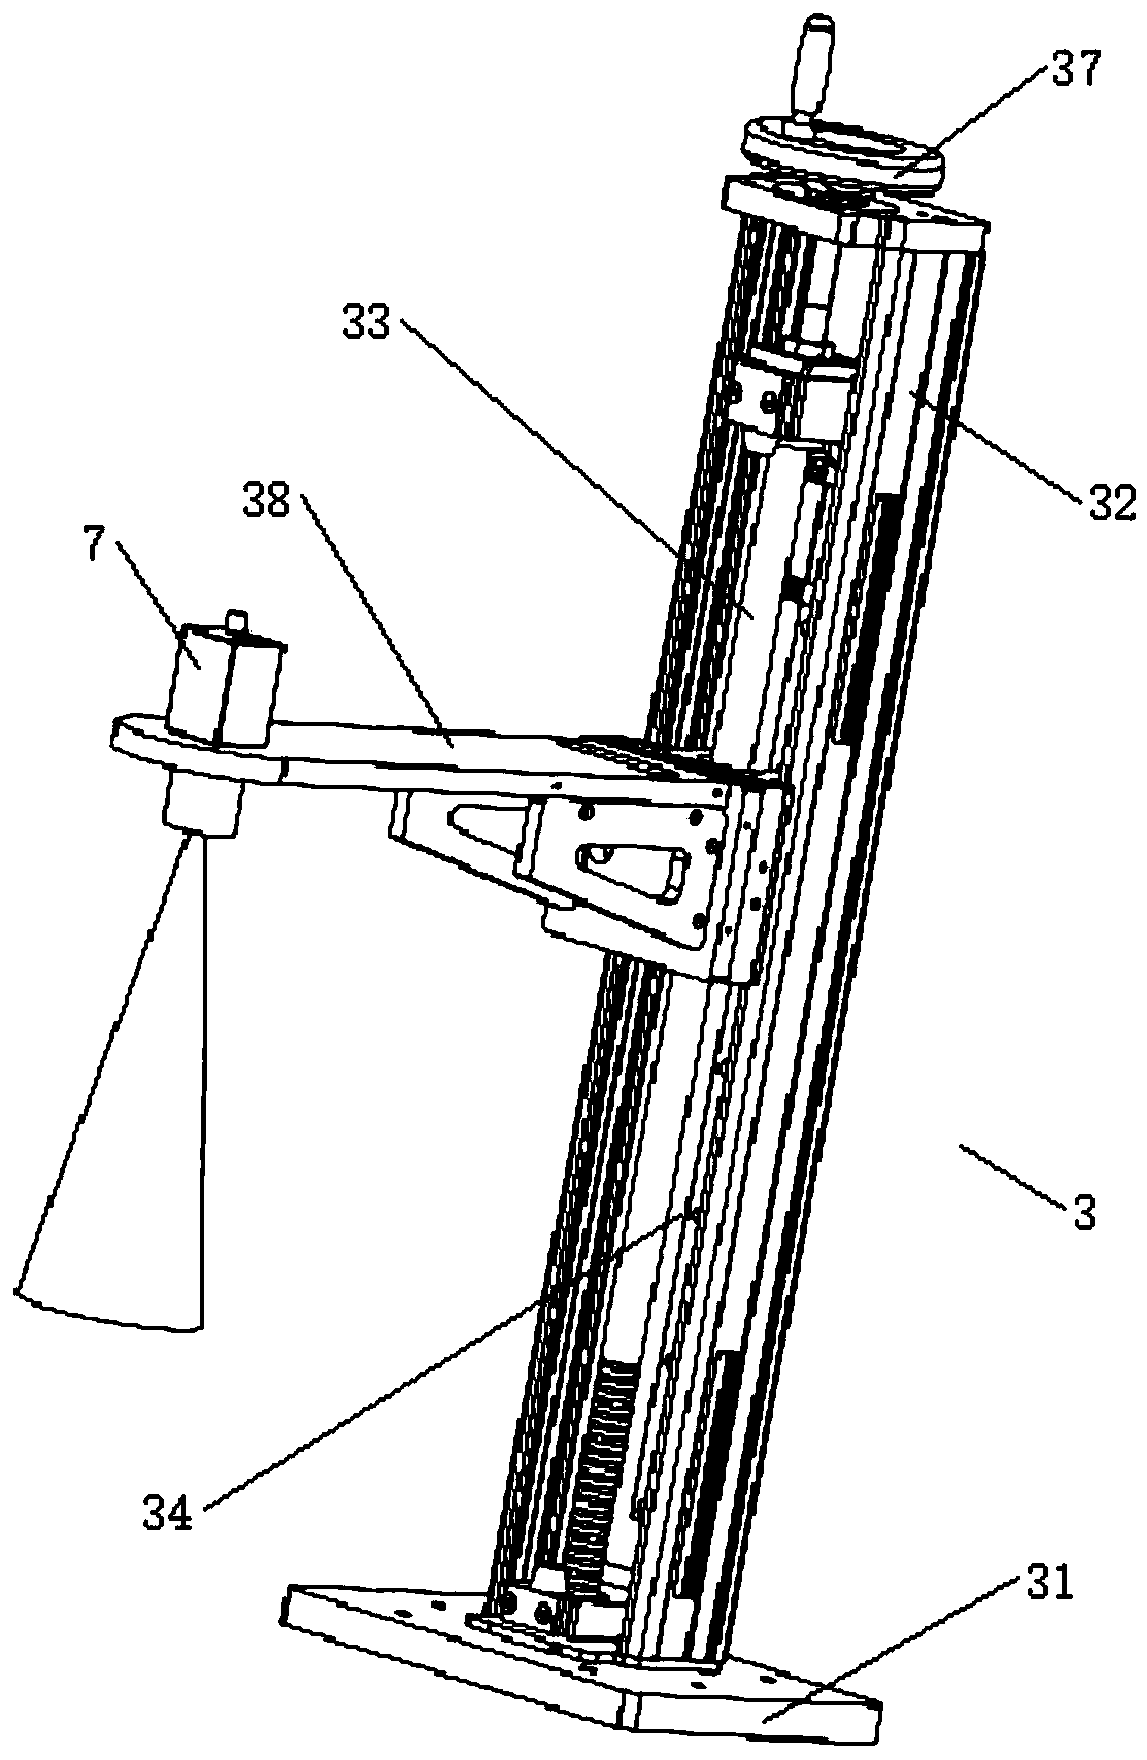 Camera-based keyboard automatic assembling device for practical training